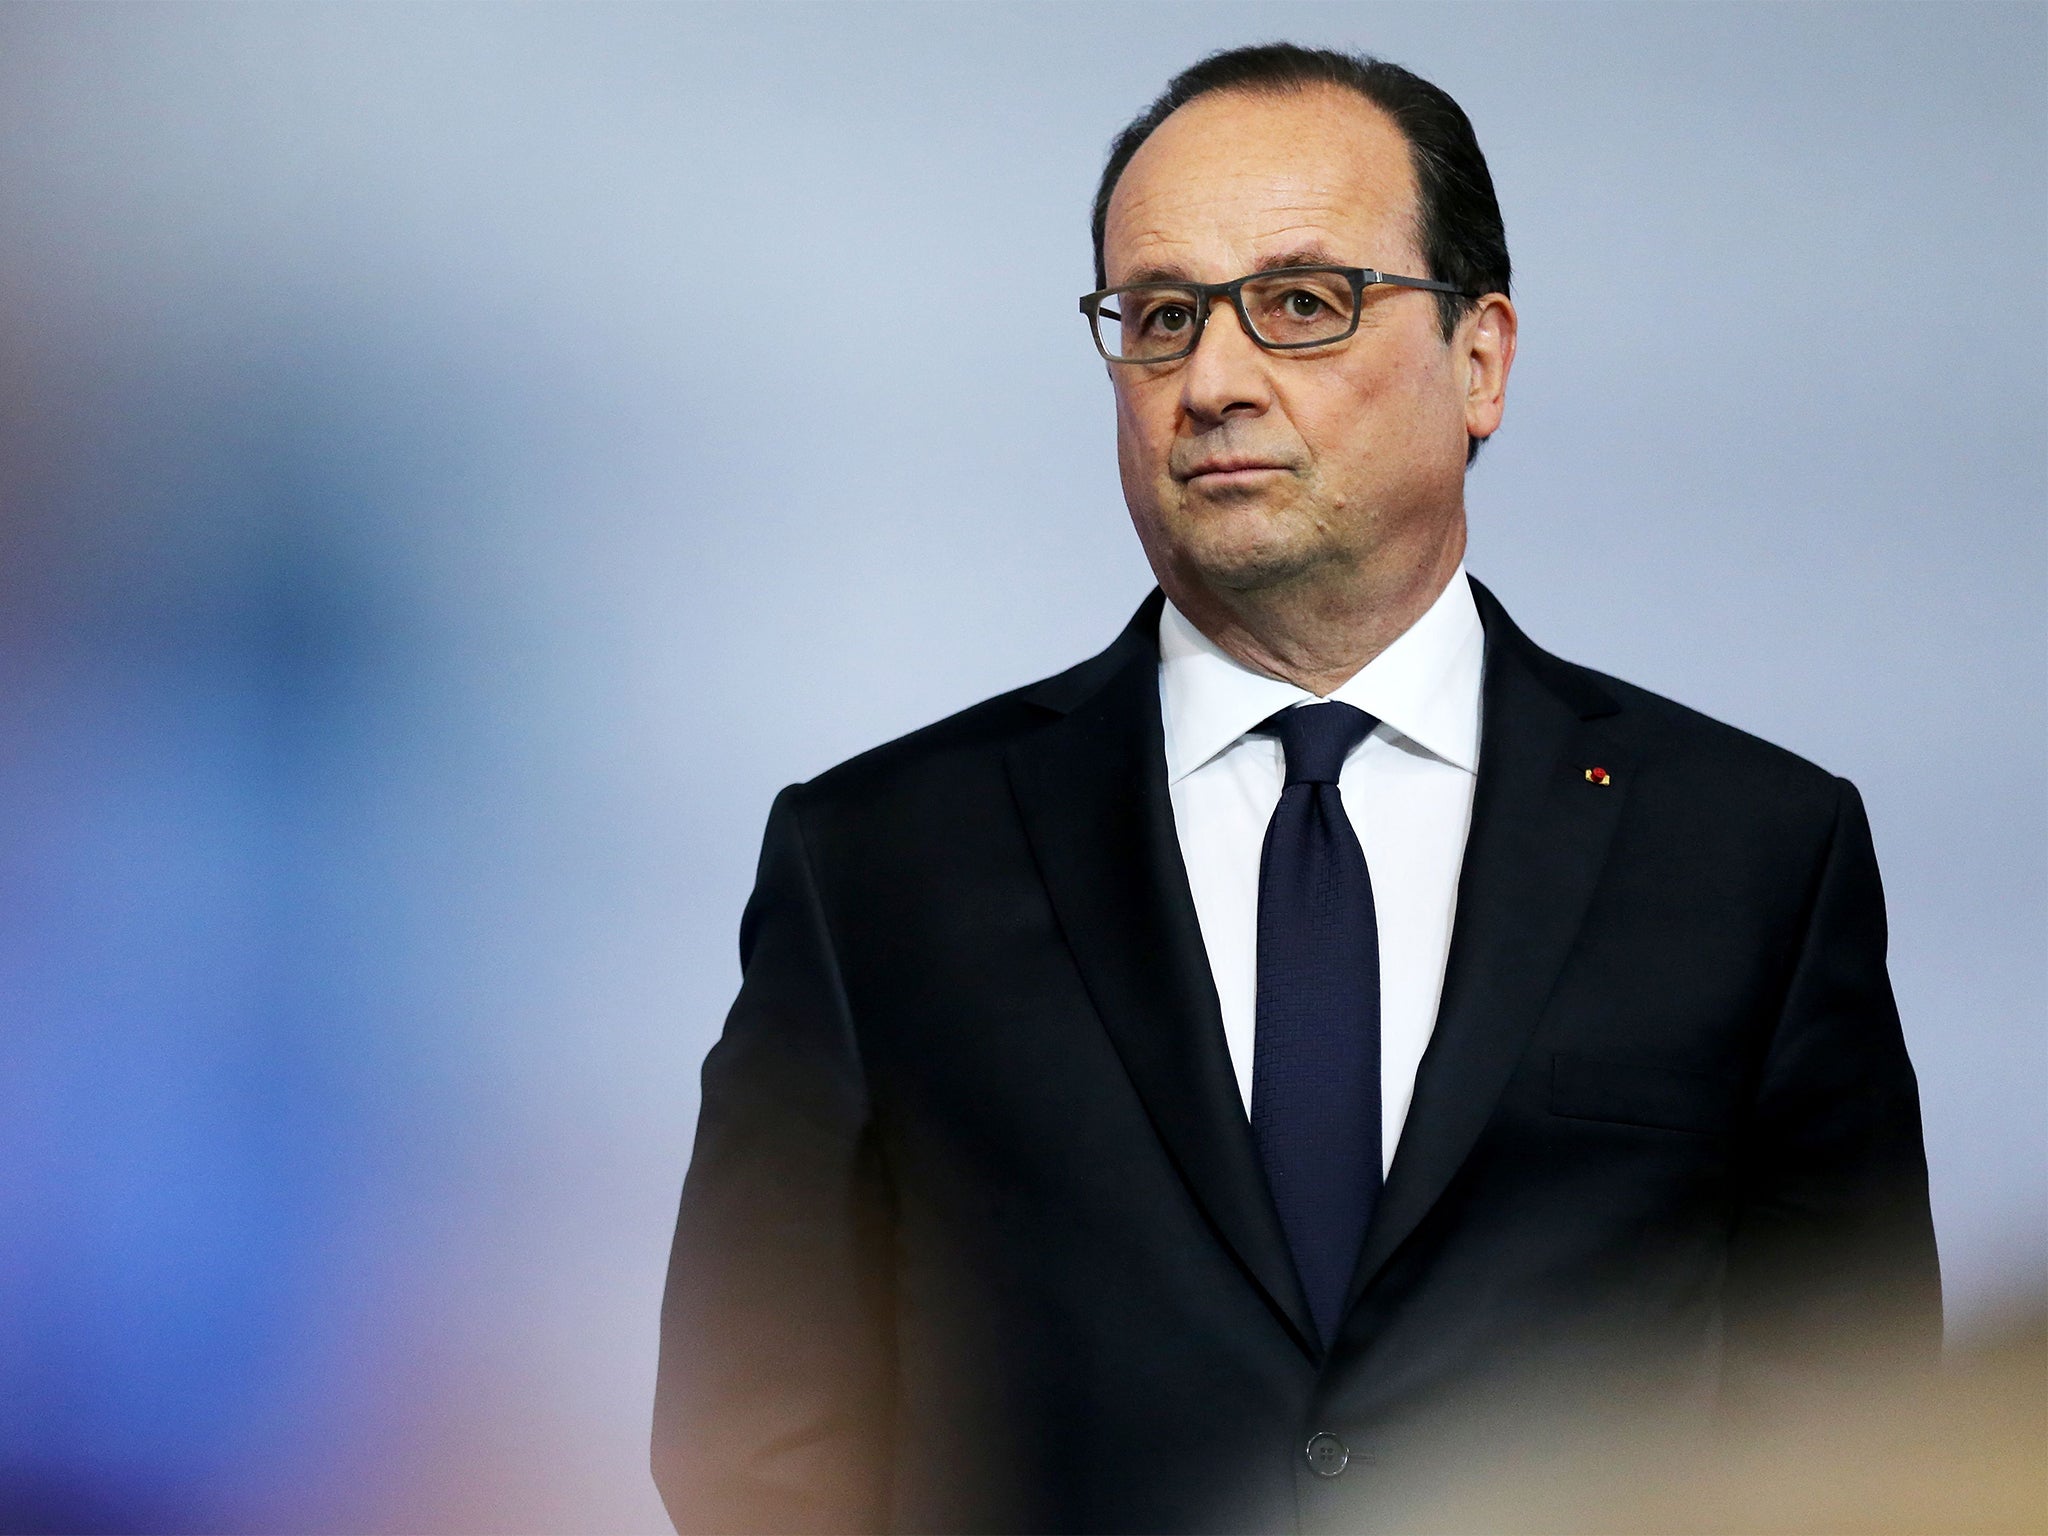 President Hollande's most candid interviews have been published in a new book